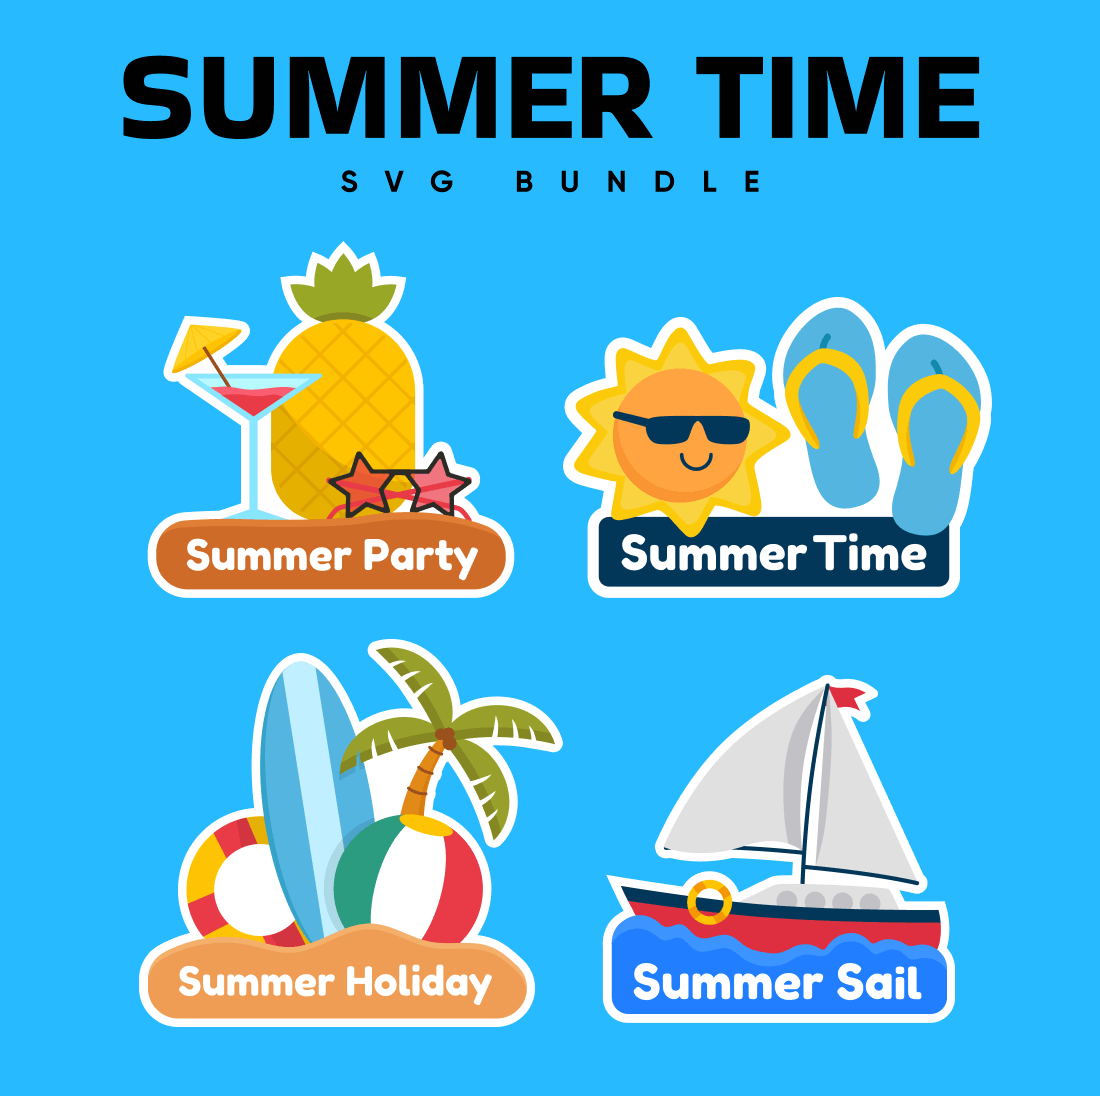 Summer time and summer trip SVG files.